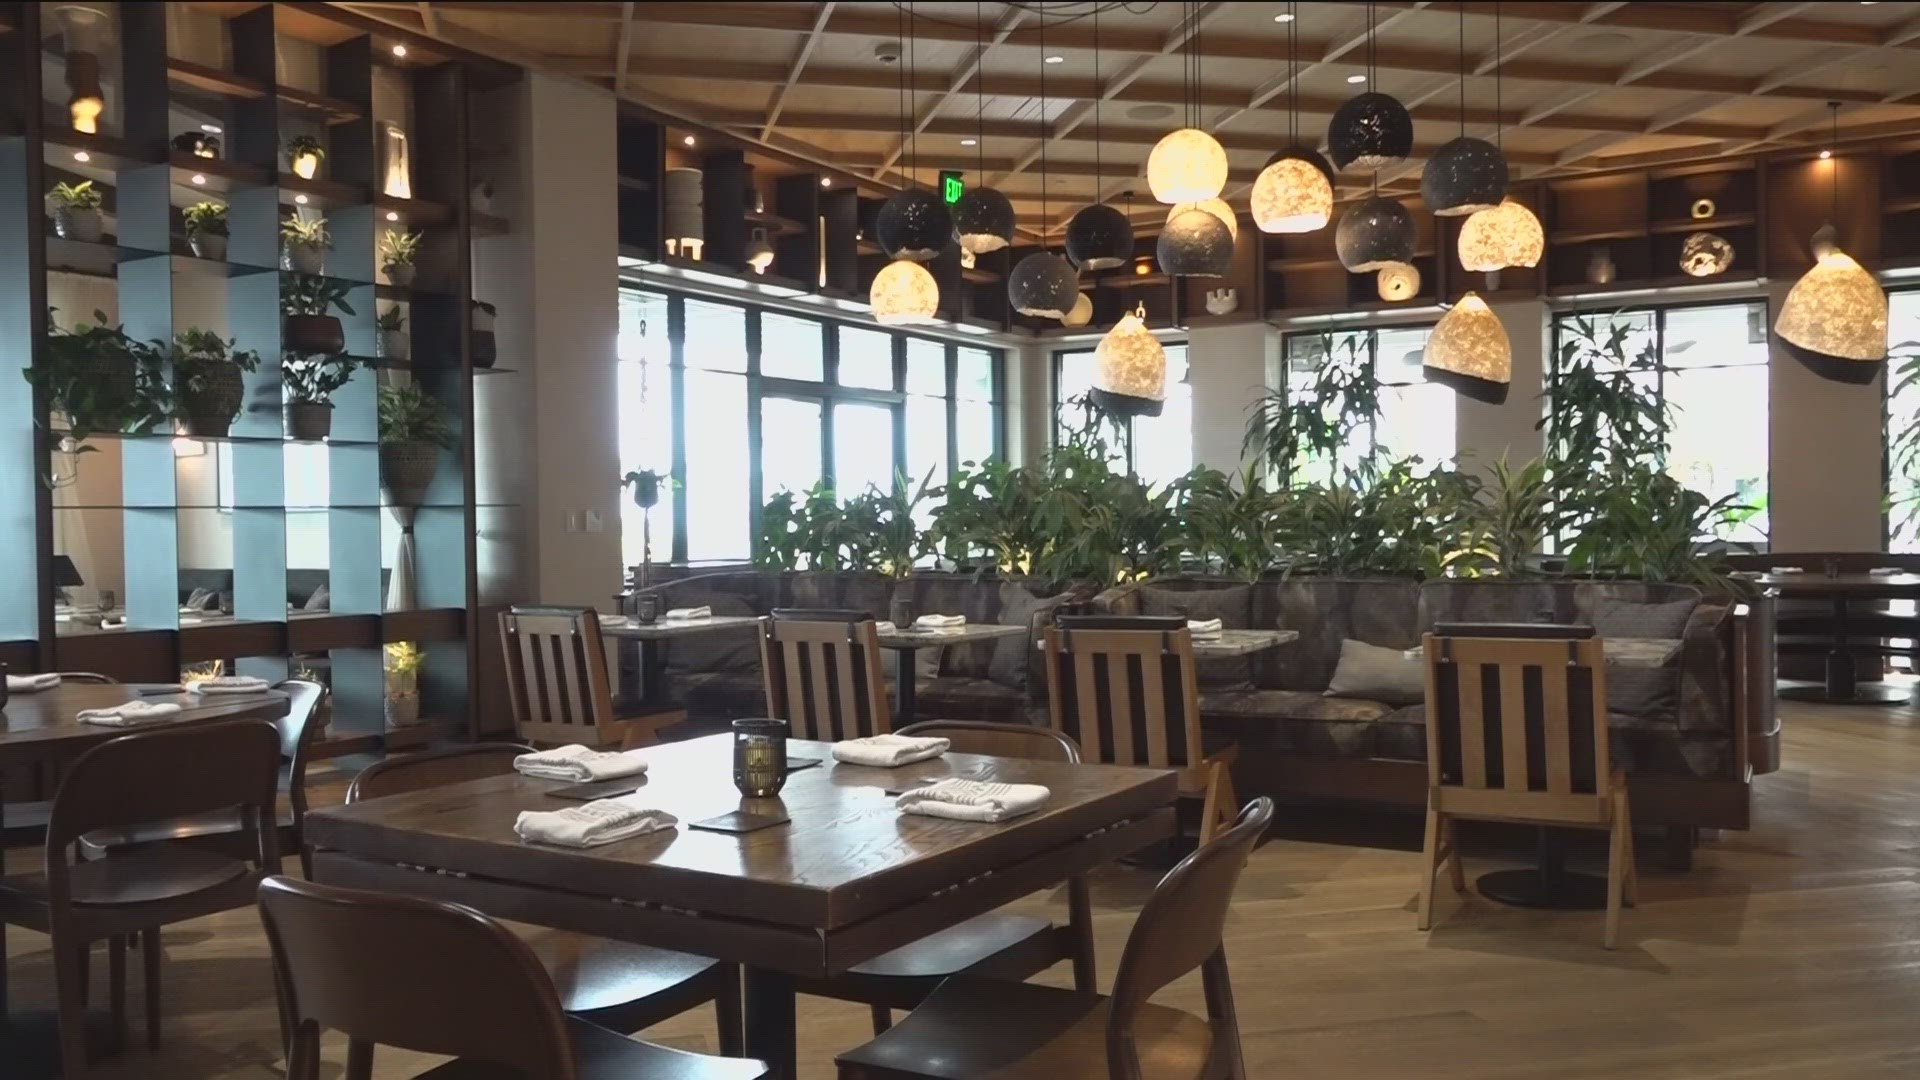 Valle is now one of five restaurants in San Diego with a Michelin star, the only restaurant that serves Mexican cuisine.